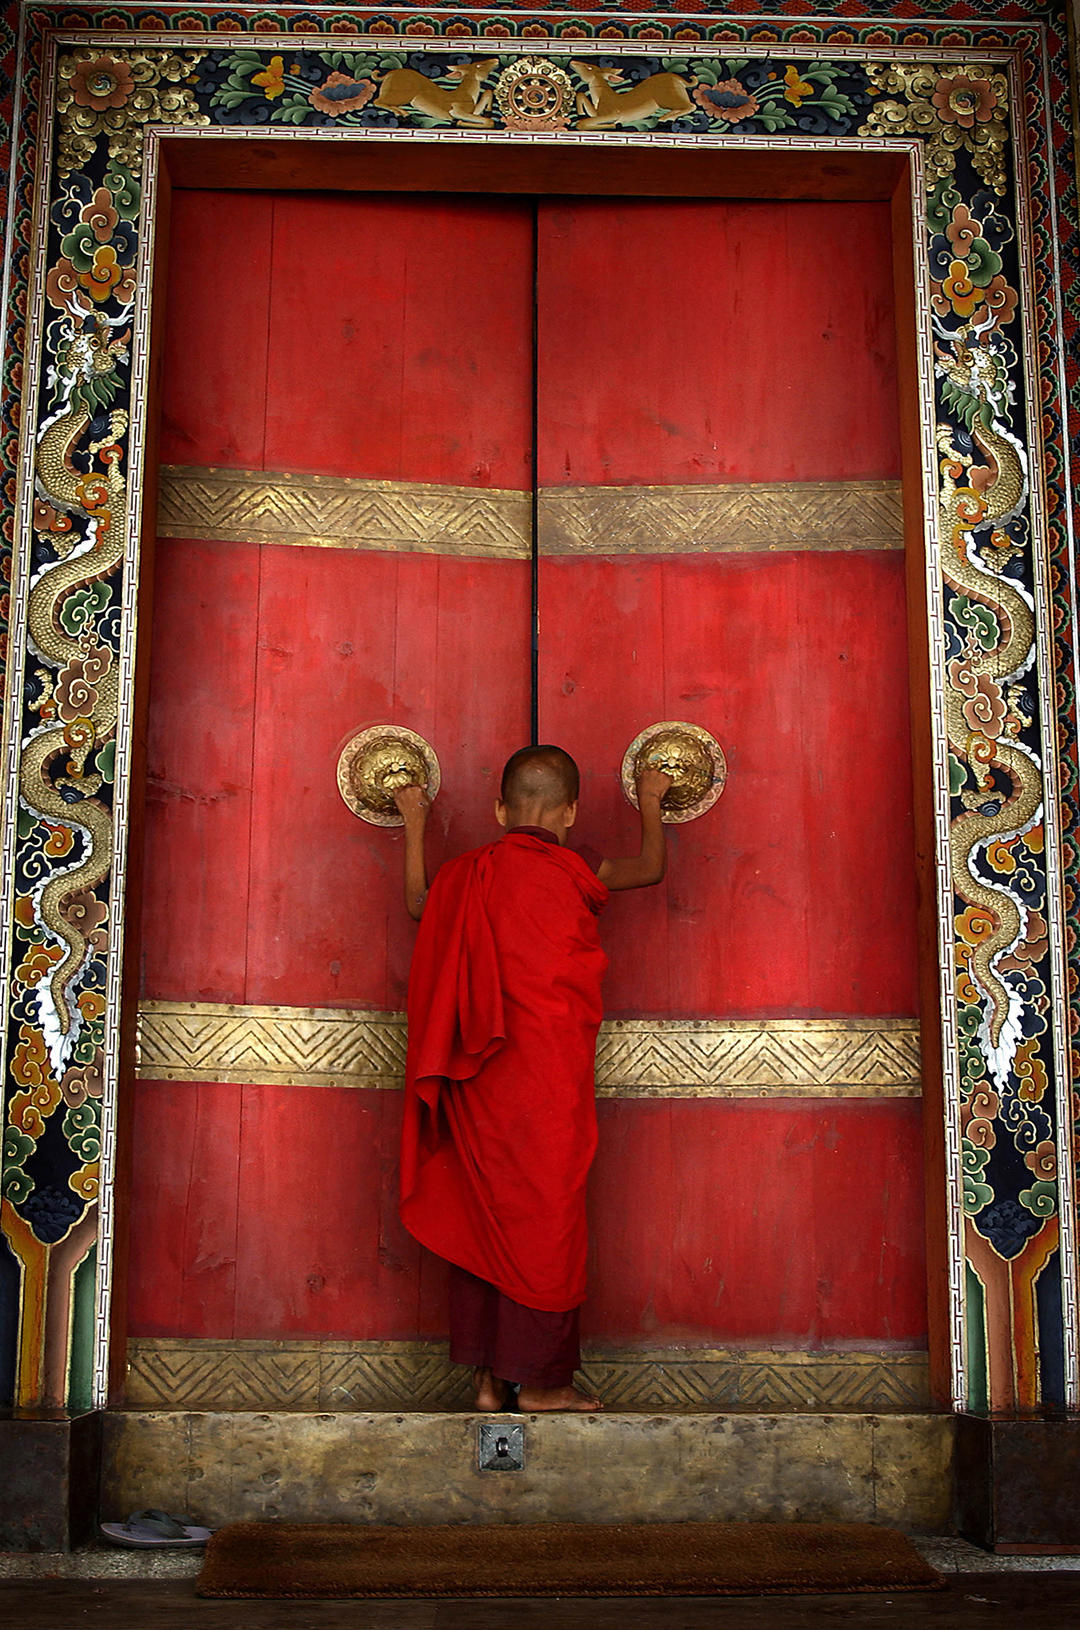 BHUTAN:THE LAST SHANGRI LA 2: A Buddhist monk enters the formidable doors of Trongsa Dzong, the Ancestral home of Bhutan? monarchy. The Himalayan kingdom of Bhutan has sat in isolation for thousands of years and only recently has been thrust into the glare of modern times after centuries of solitude. Bhutan is a tiny, remote, and impoverished country wedged precariously between two powerful neighbors, India and China. Violent storms coming off the Himalaya gave the country its name, meaning "Land of the Thunder Dragon." This conservative Buddhist kingdom high in the Himalaya had no paved roads until the 1960s, was off-limits to foreigners until 1974, and launched television only in 1999 .